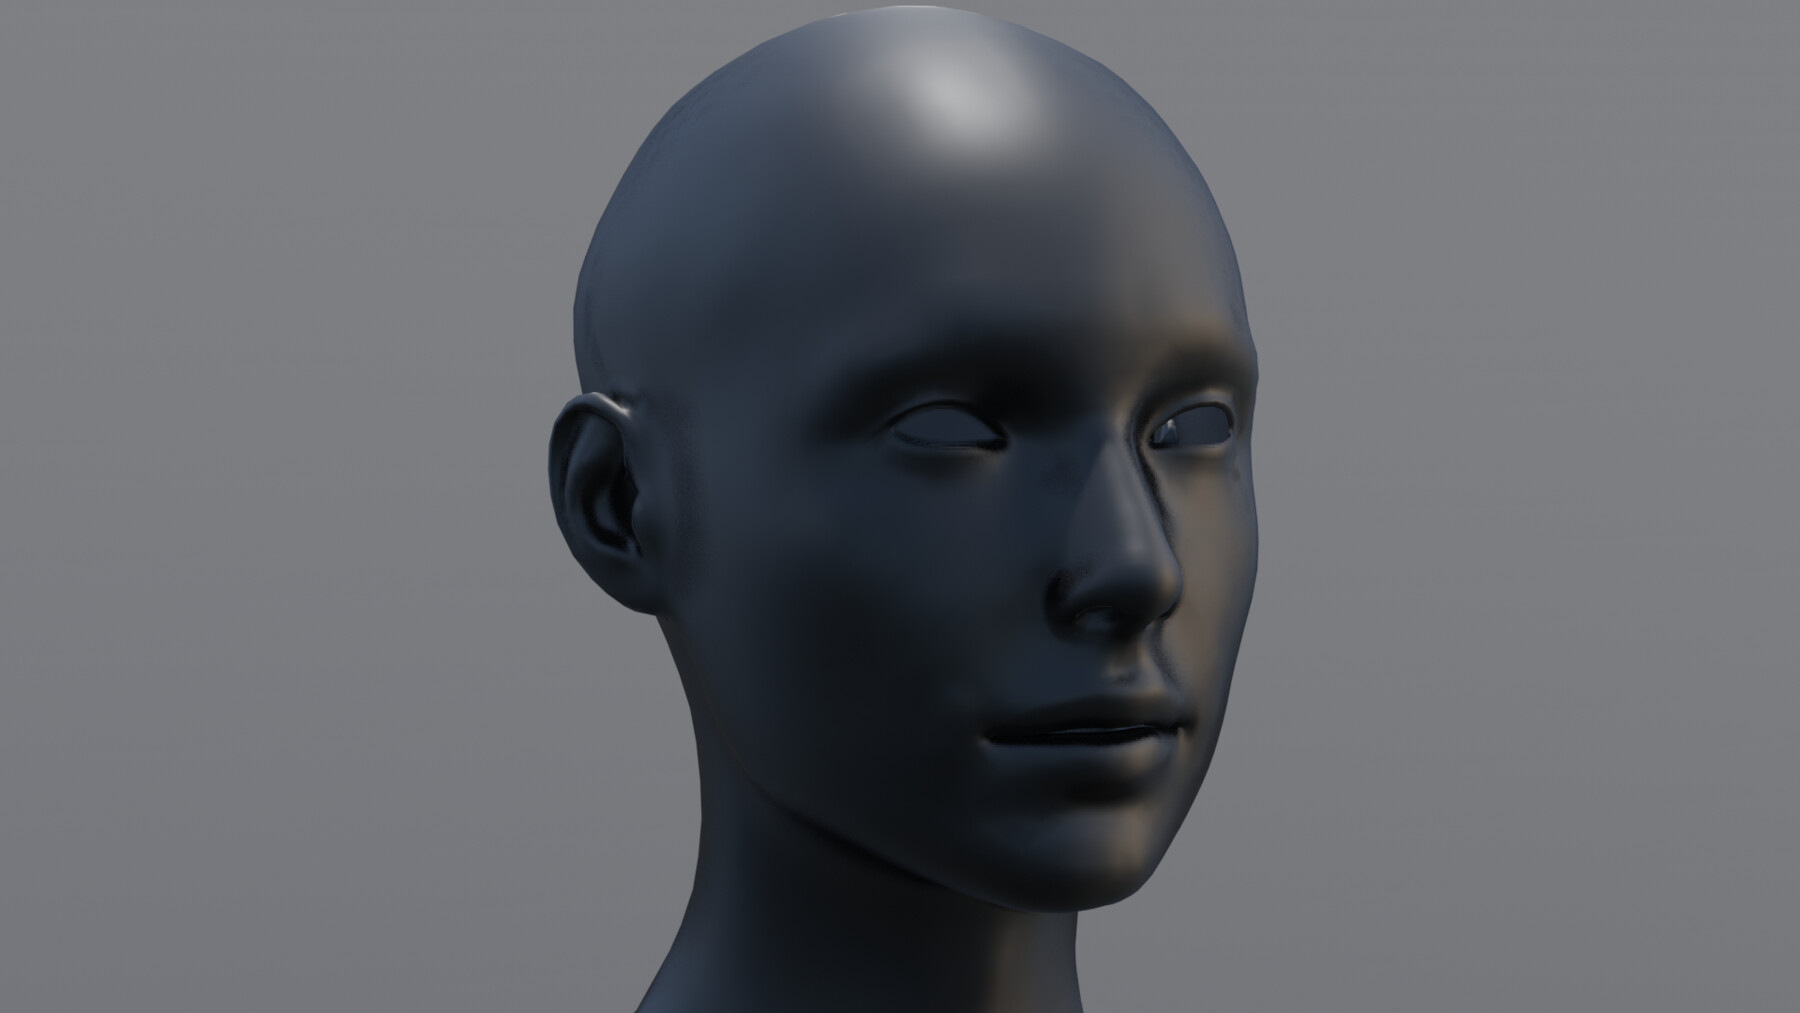 Mannequin heads 3D Model Collection